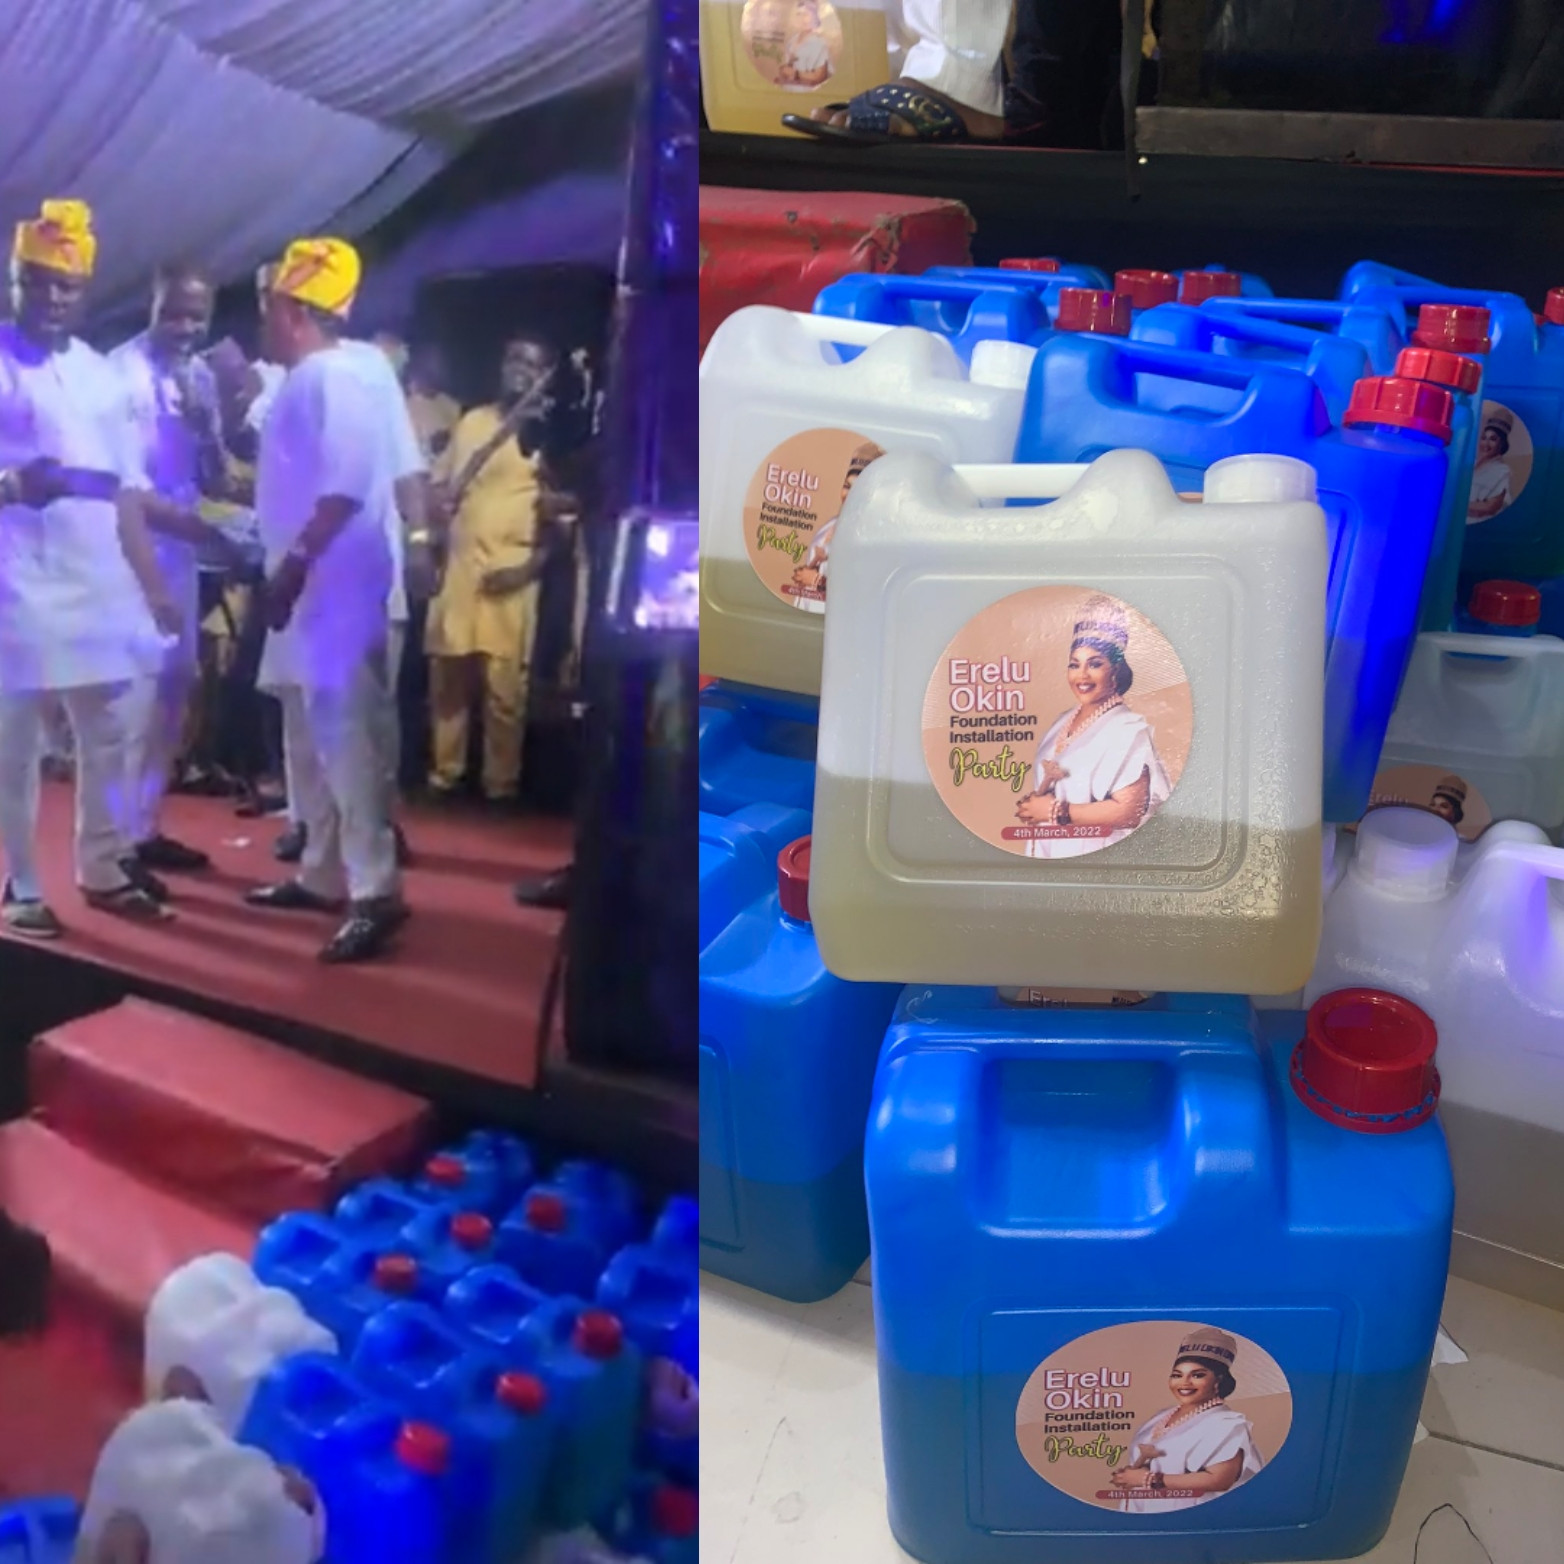 KEGS OF PETROL SHARED AS SOUVENIR AT A PARTY IN NIGERIA (PHOTOS)